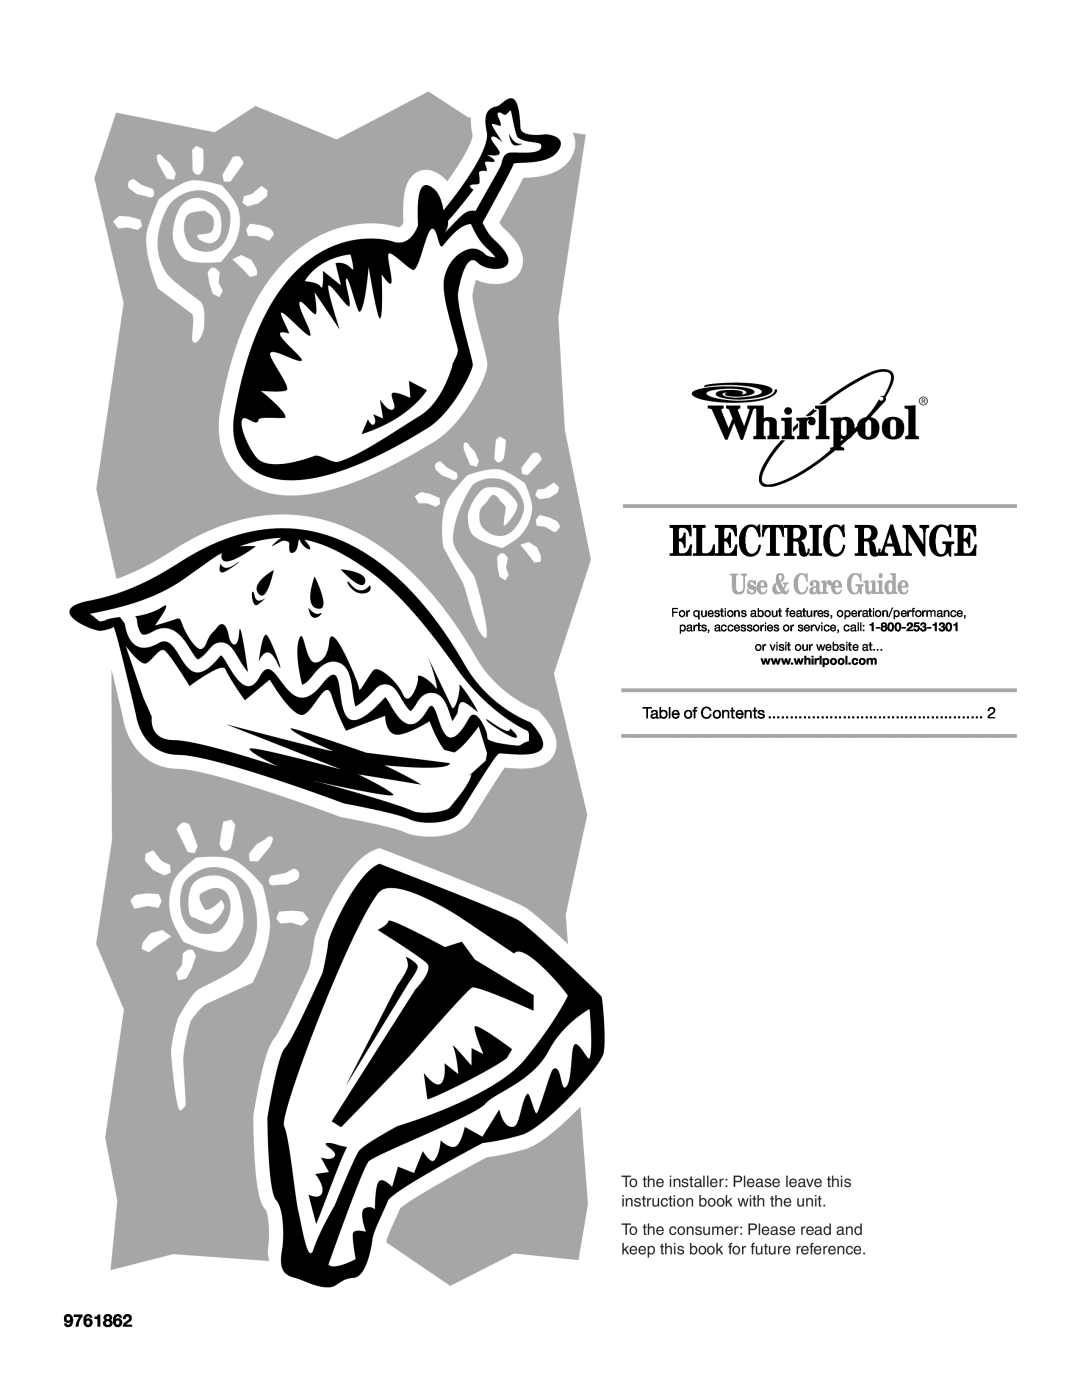 Whirlpool 9761862 manual Electric Range, Use & Care Guide, or visit our website at 